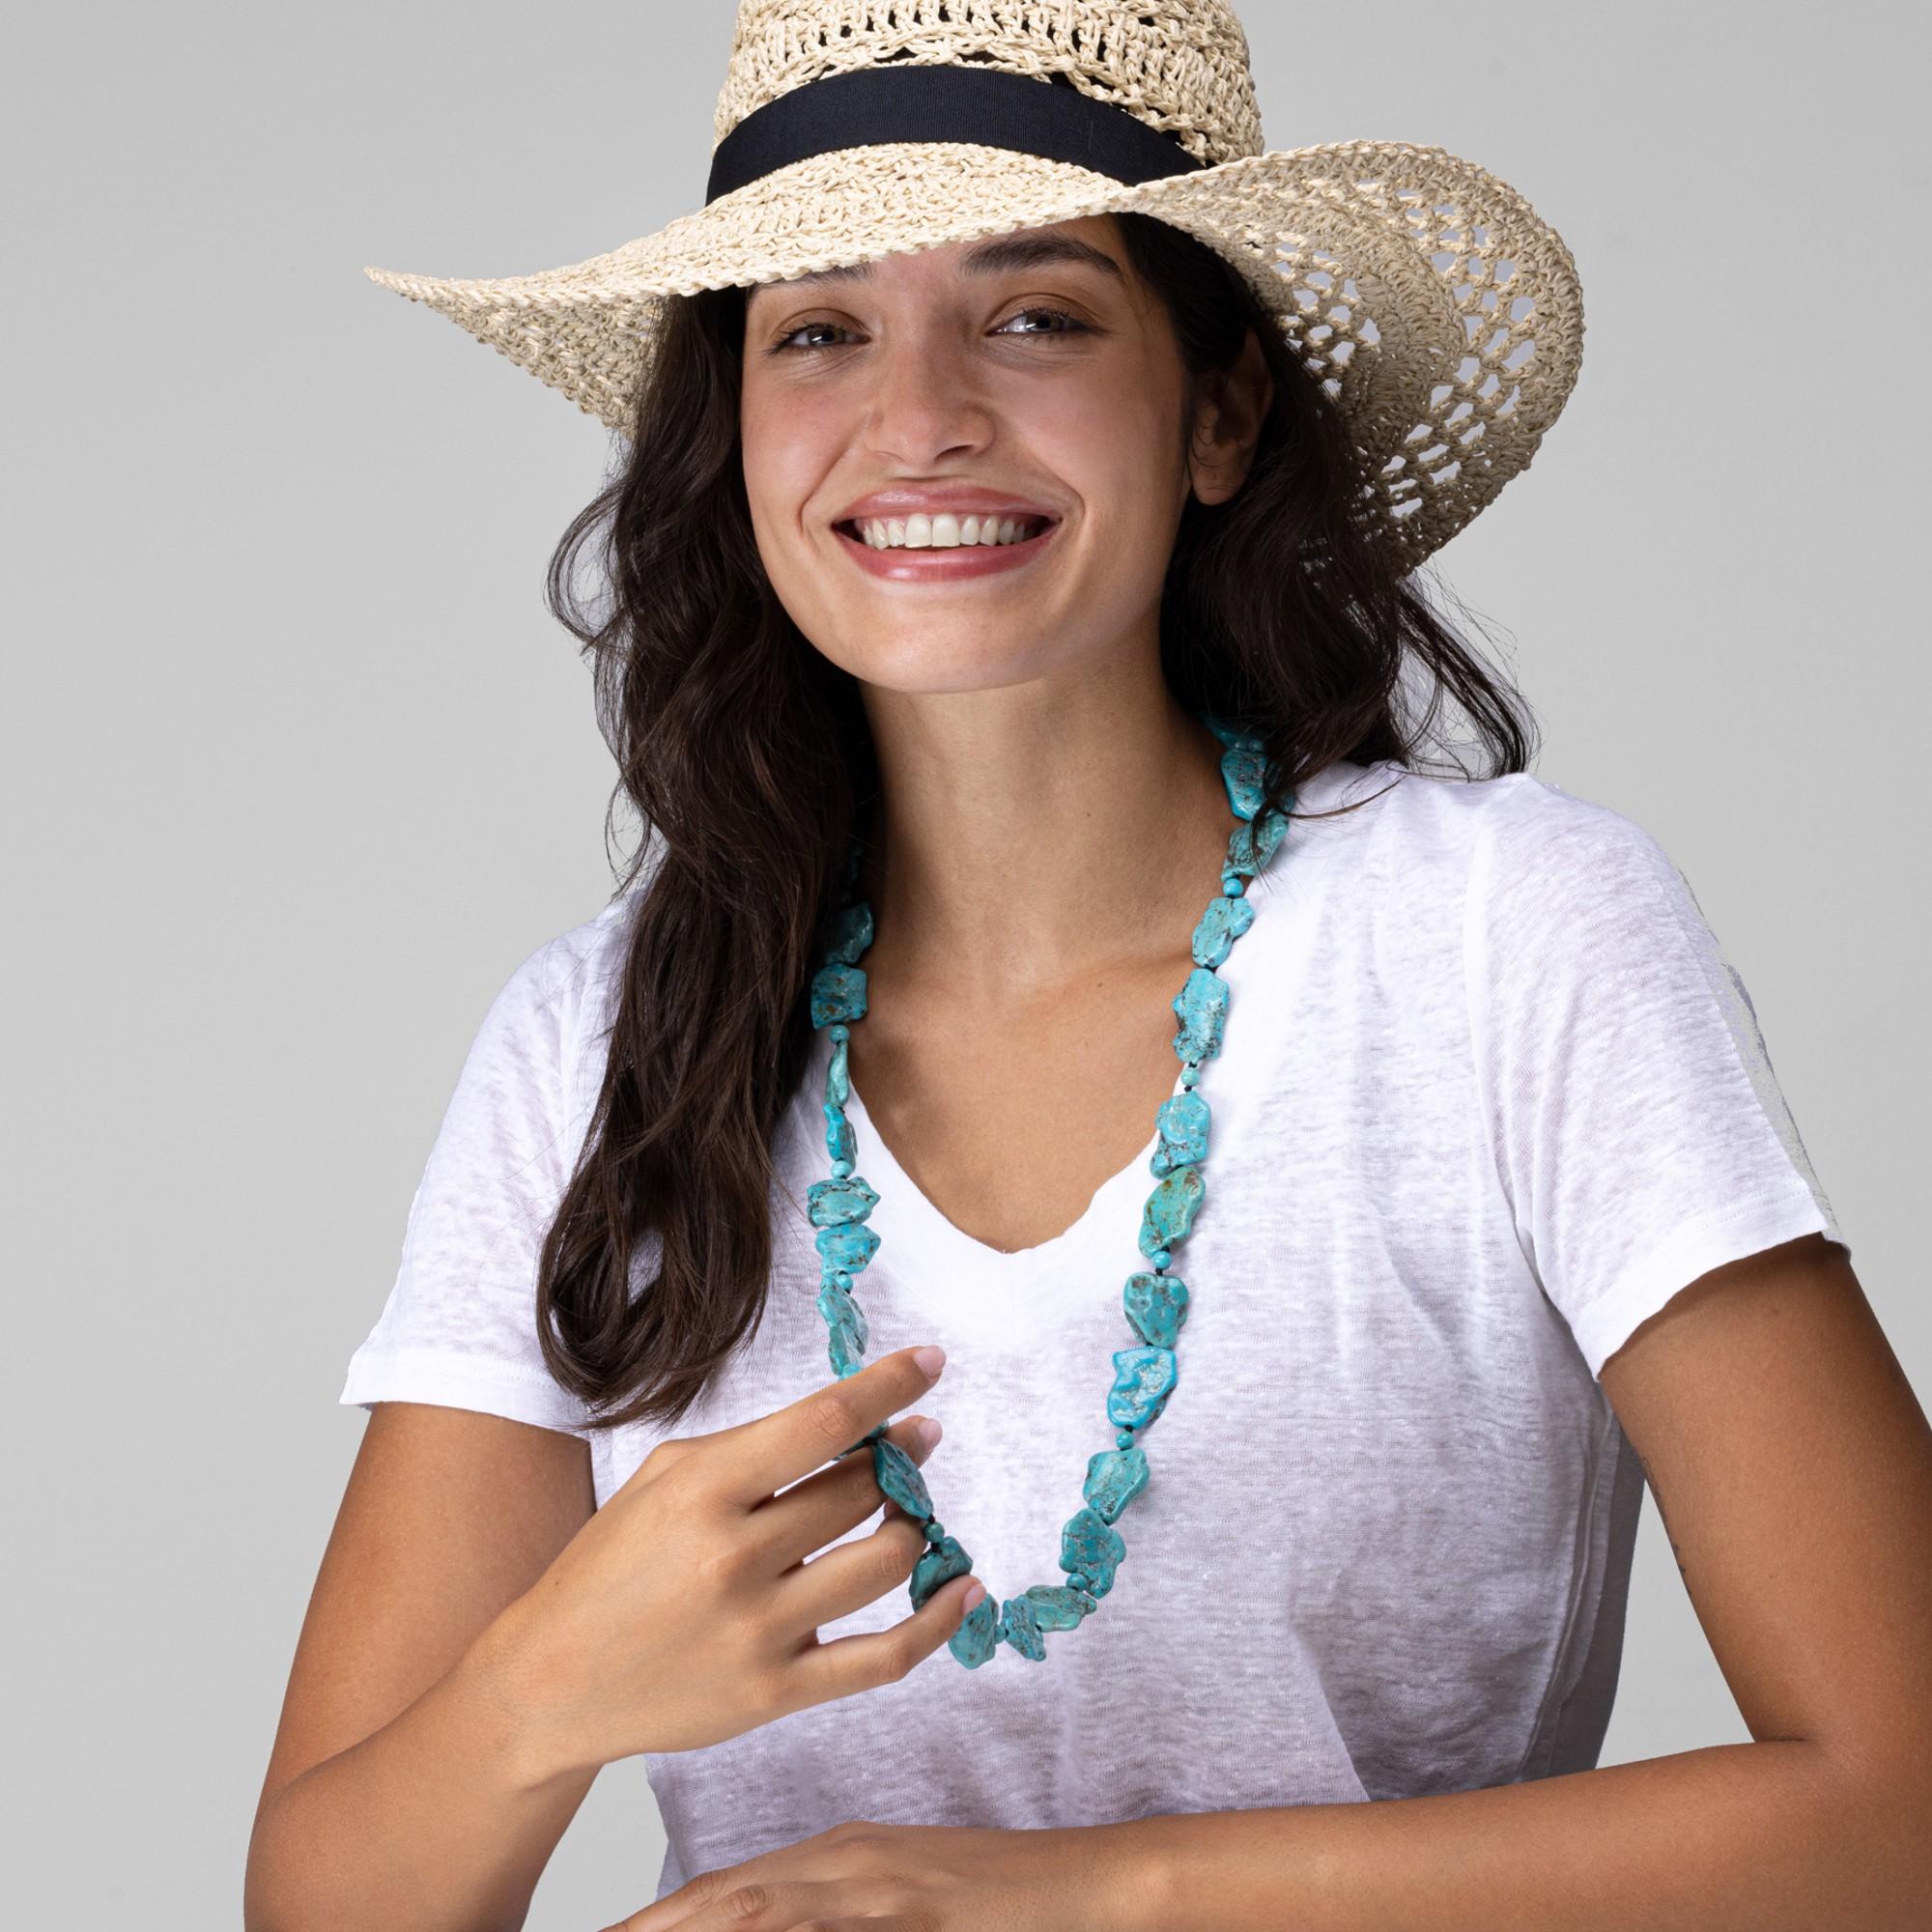 Alex Jona design collection, long necklace made of flat turquoise pebbles.
Alex Jona jewels stand out, not only for their special design and for the excellent quality of the gemstones, but also for the careful attention given to details during all